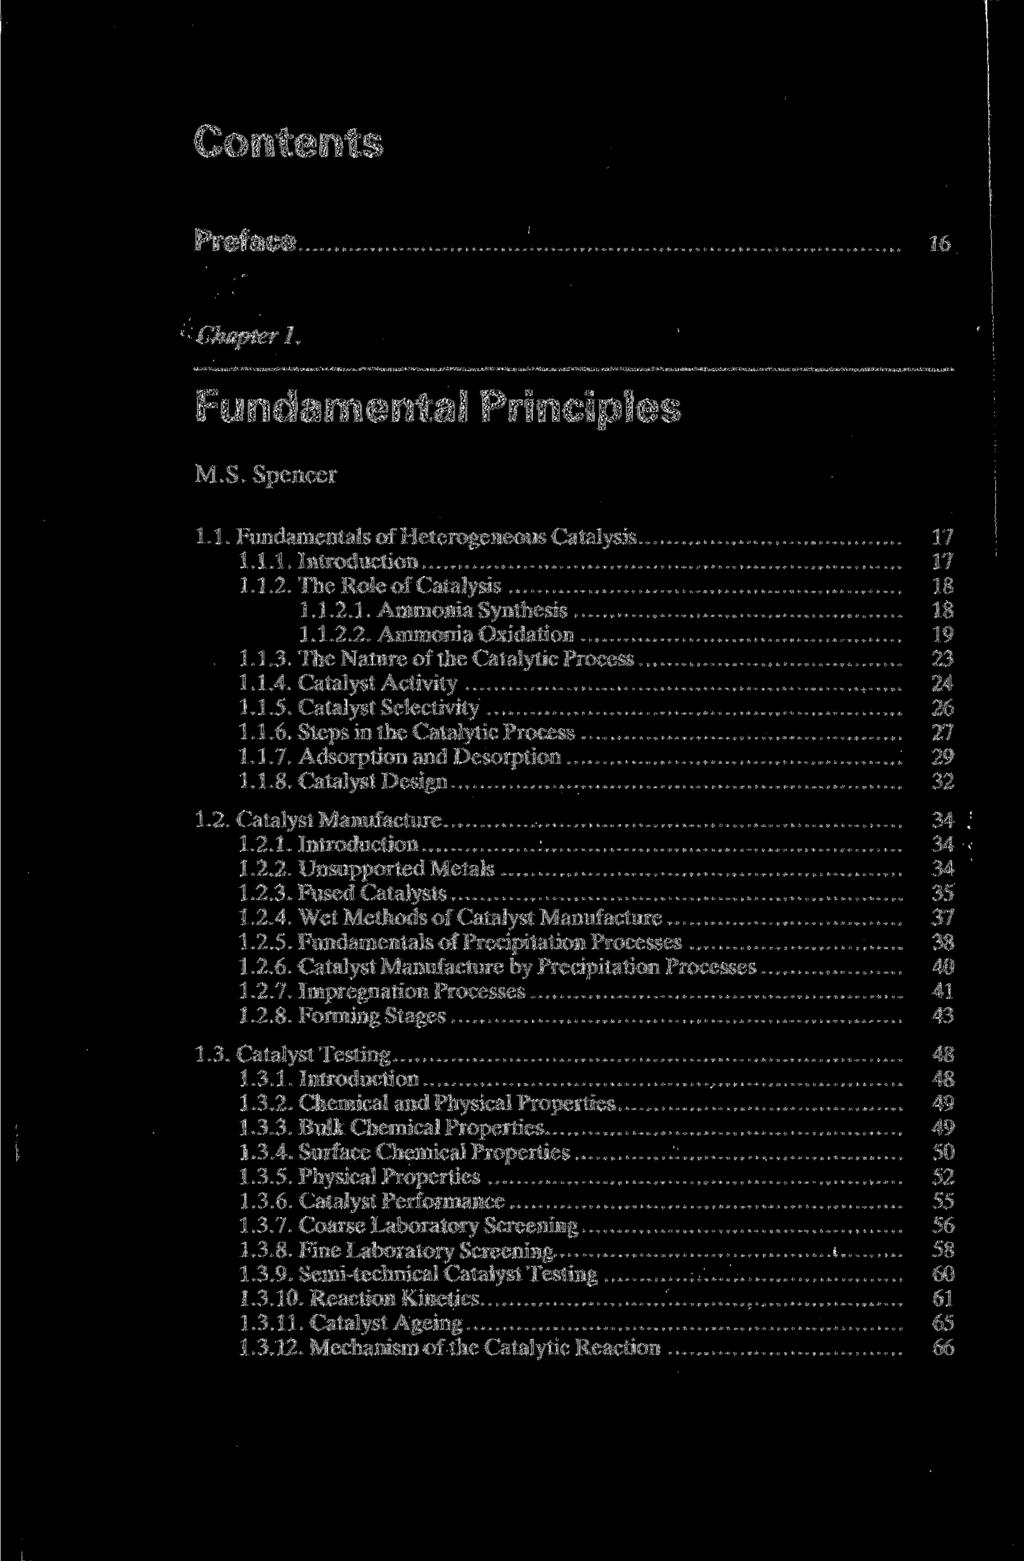 Preface 16 Chapter 1. Fundamental Principles M.S. Spencer 1.1. Fundamentals of Heterogeneous Catalysis 17 1.1.1. Introduction 17 1.1.2. The Roleof Catalysis 18 1.1.2.1. Ammonia Synthesis 18 1.1.2.2. Ammonia Oxidation 19 1.